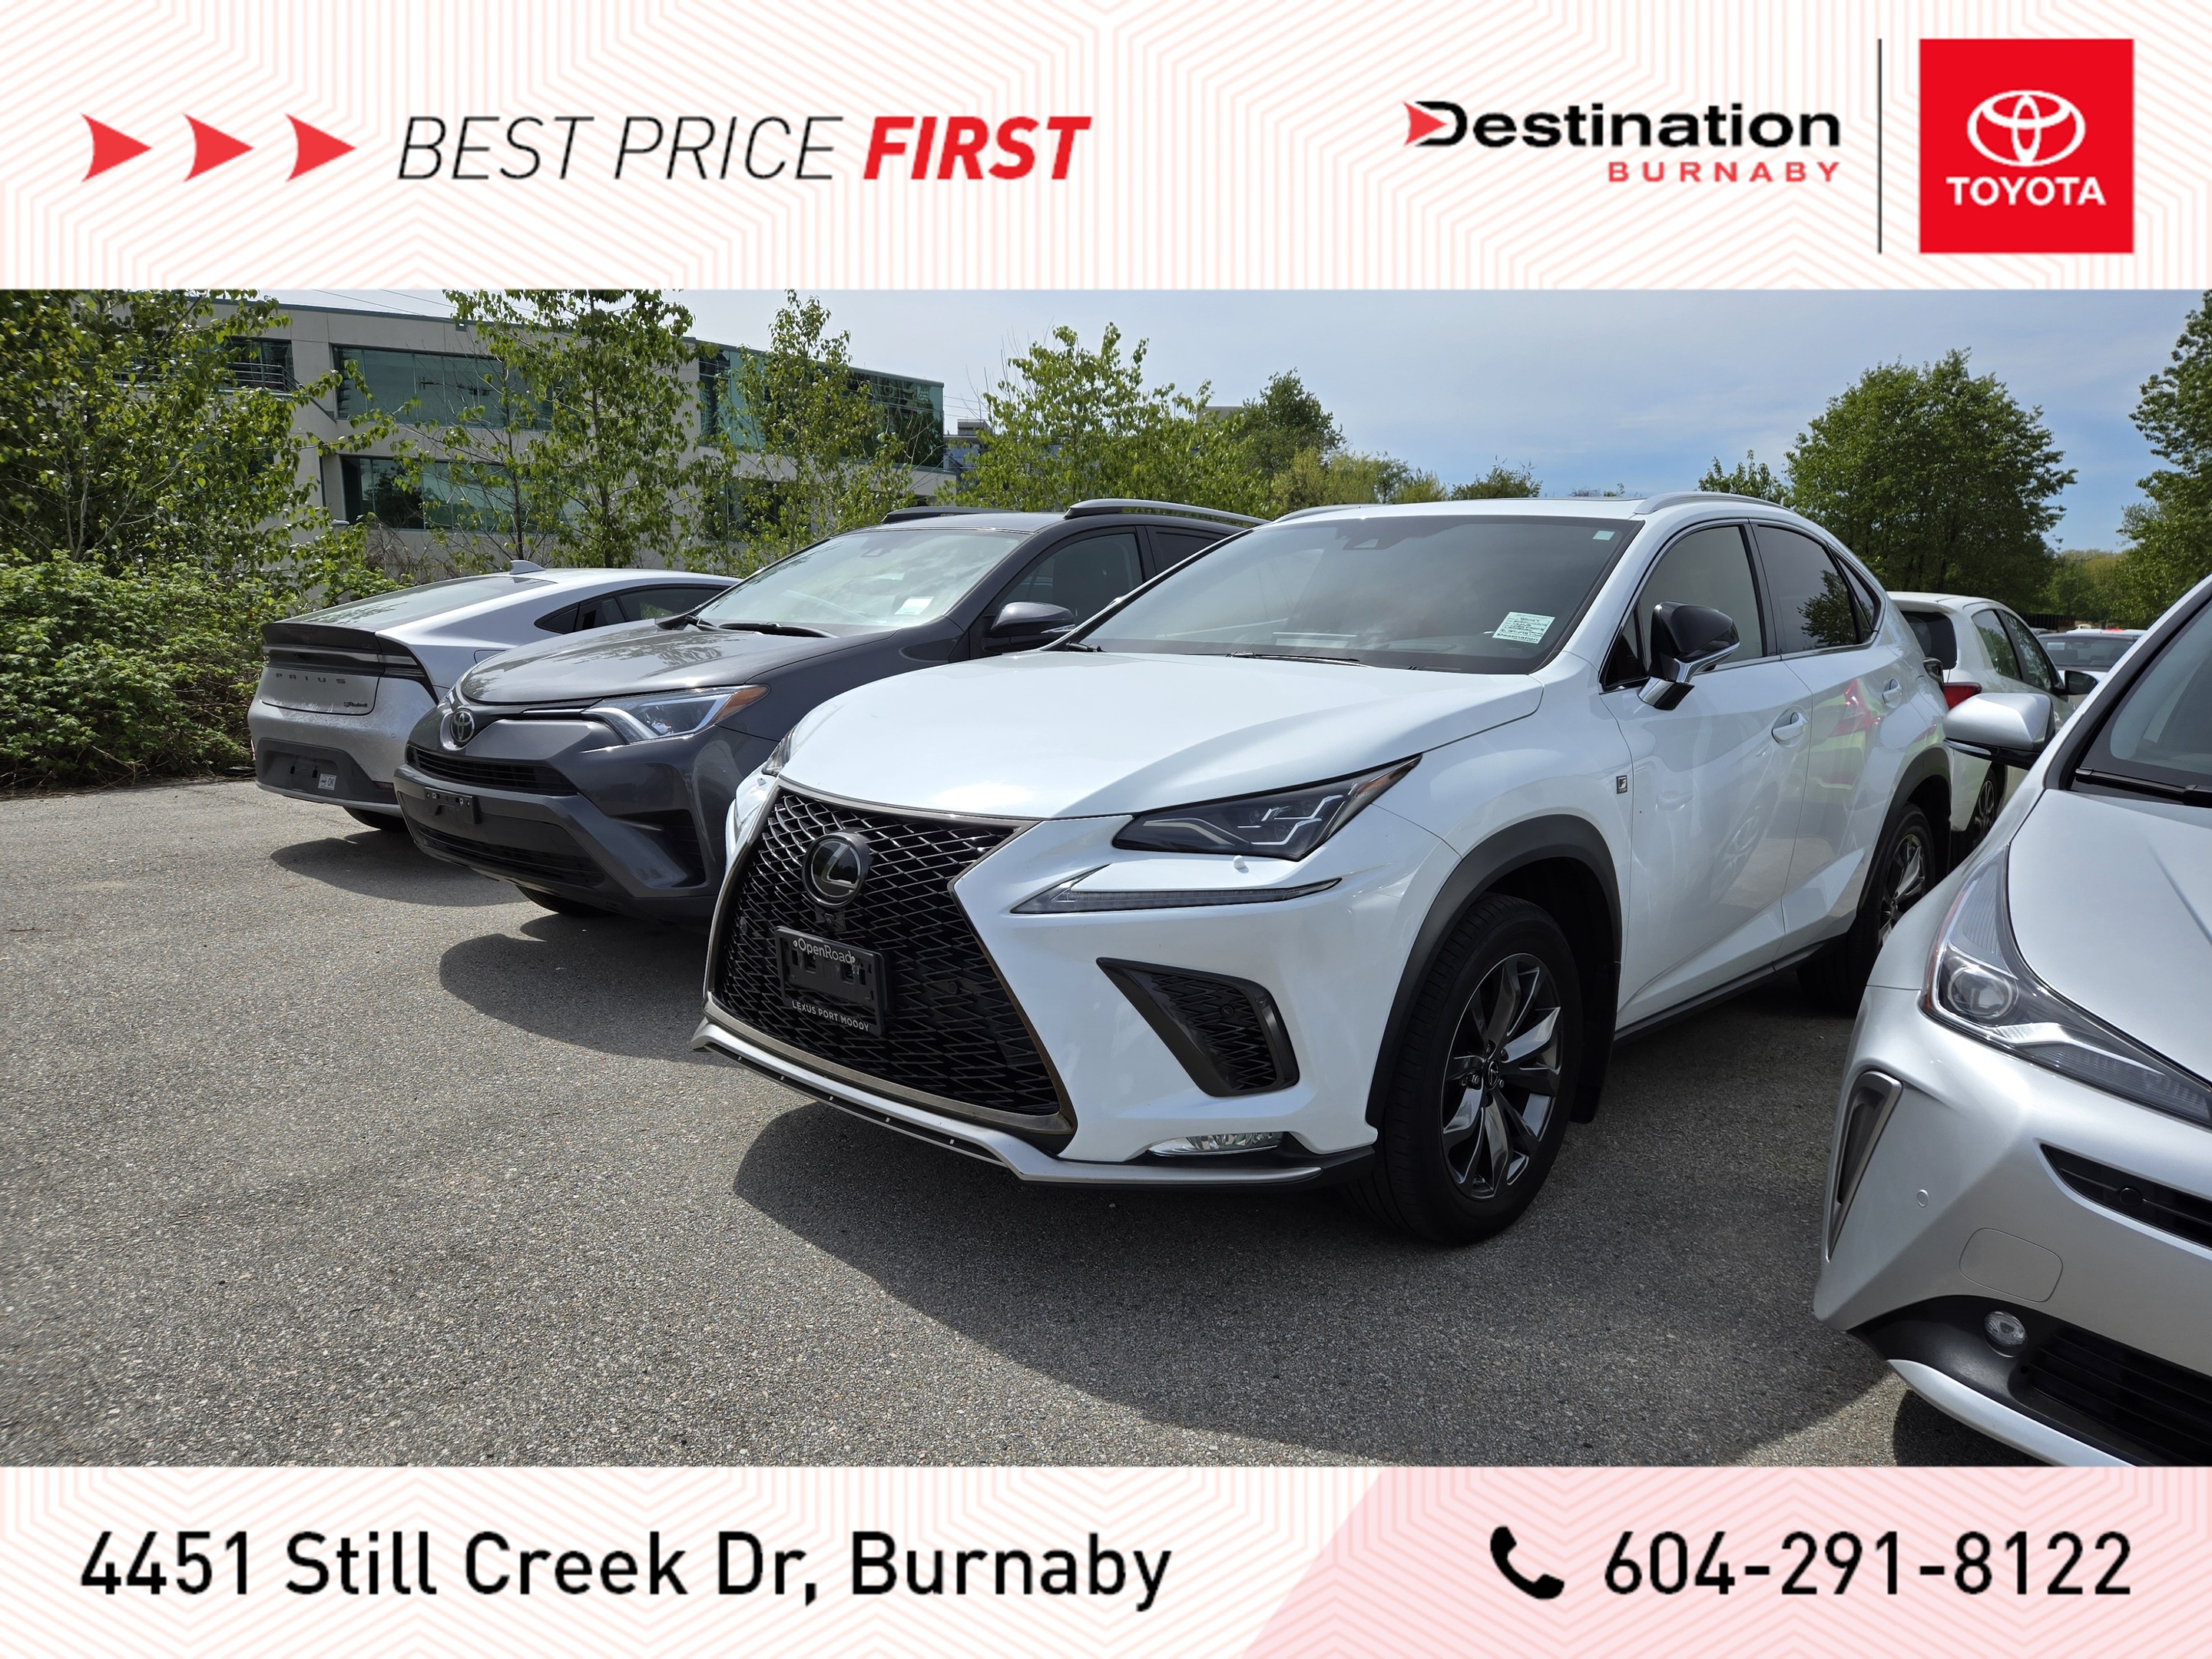 2020 Lexus NX 300 F-Sport 3 AWD - Local, No Accidents, Fully Loaded!